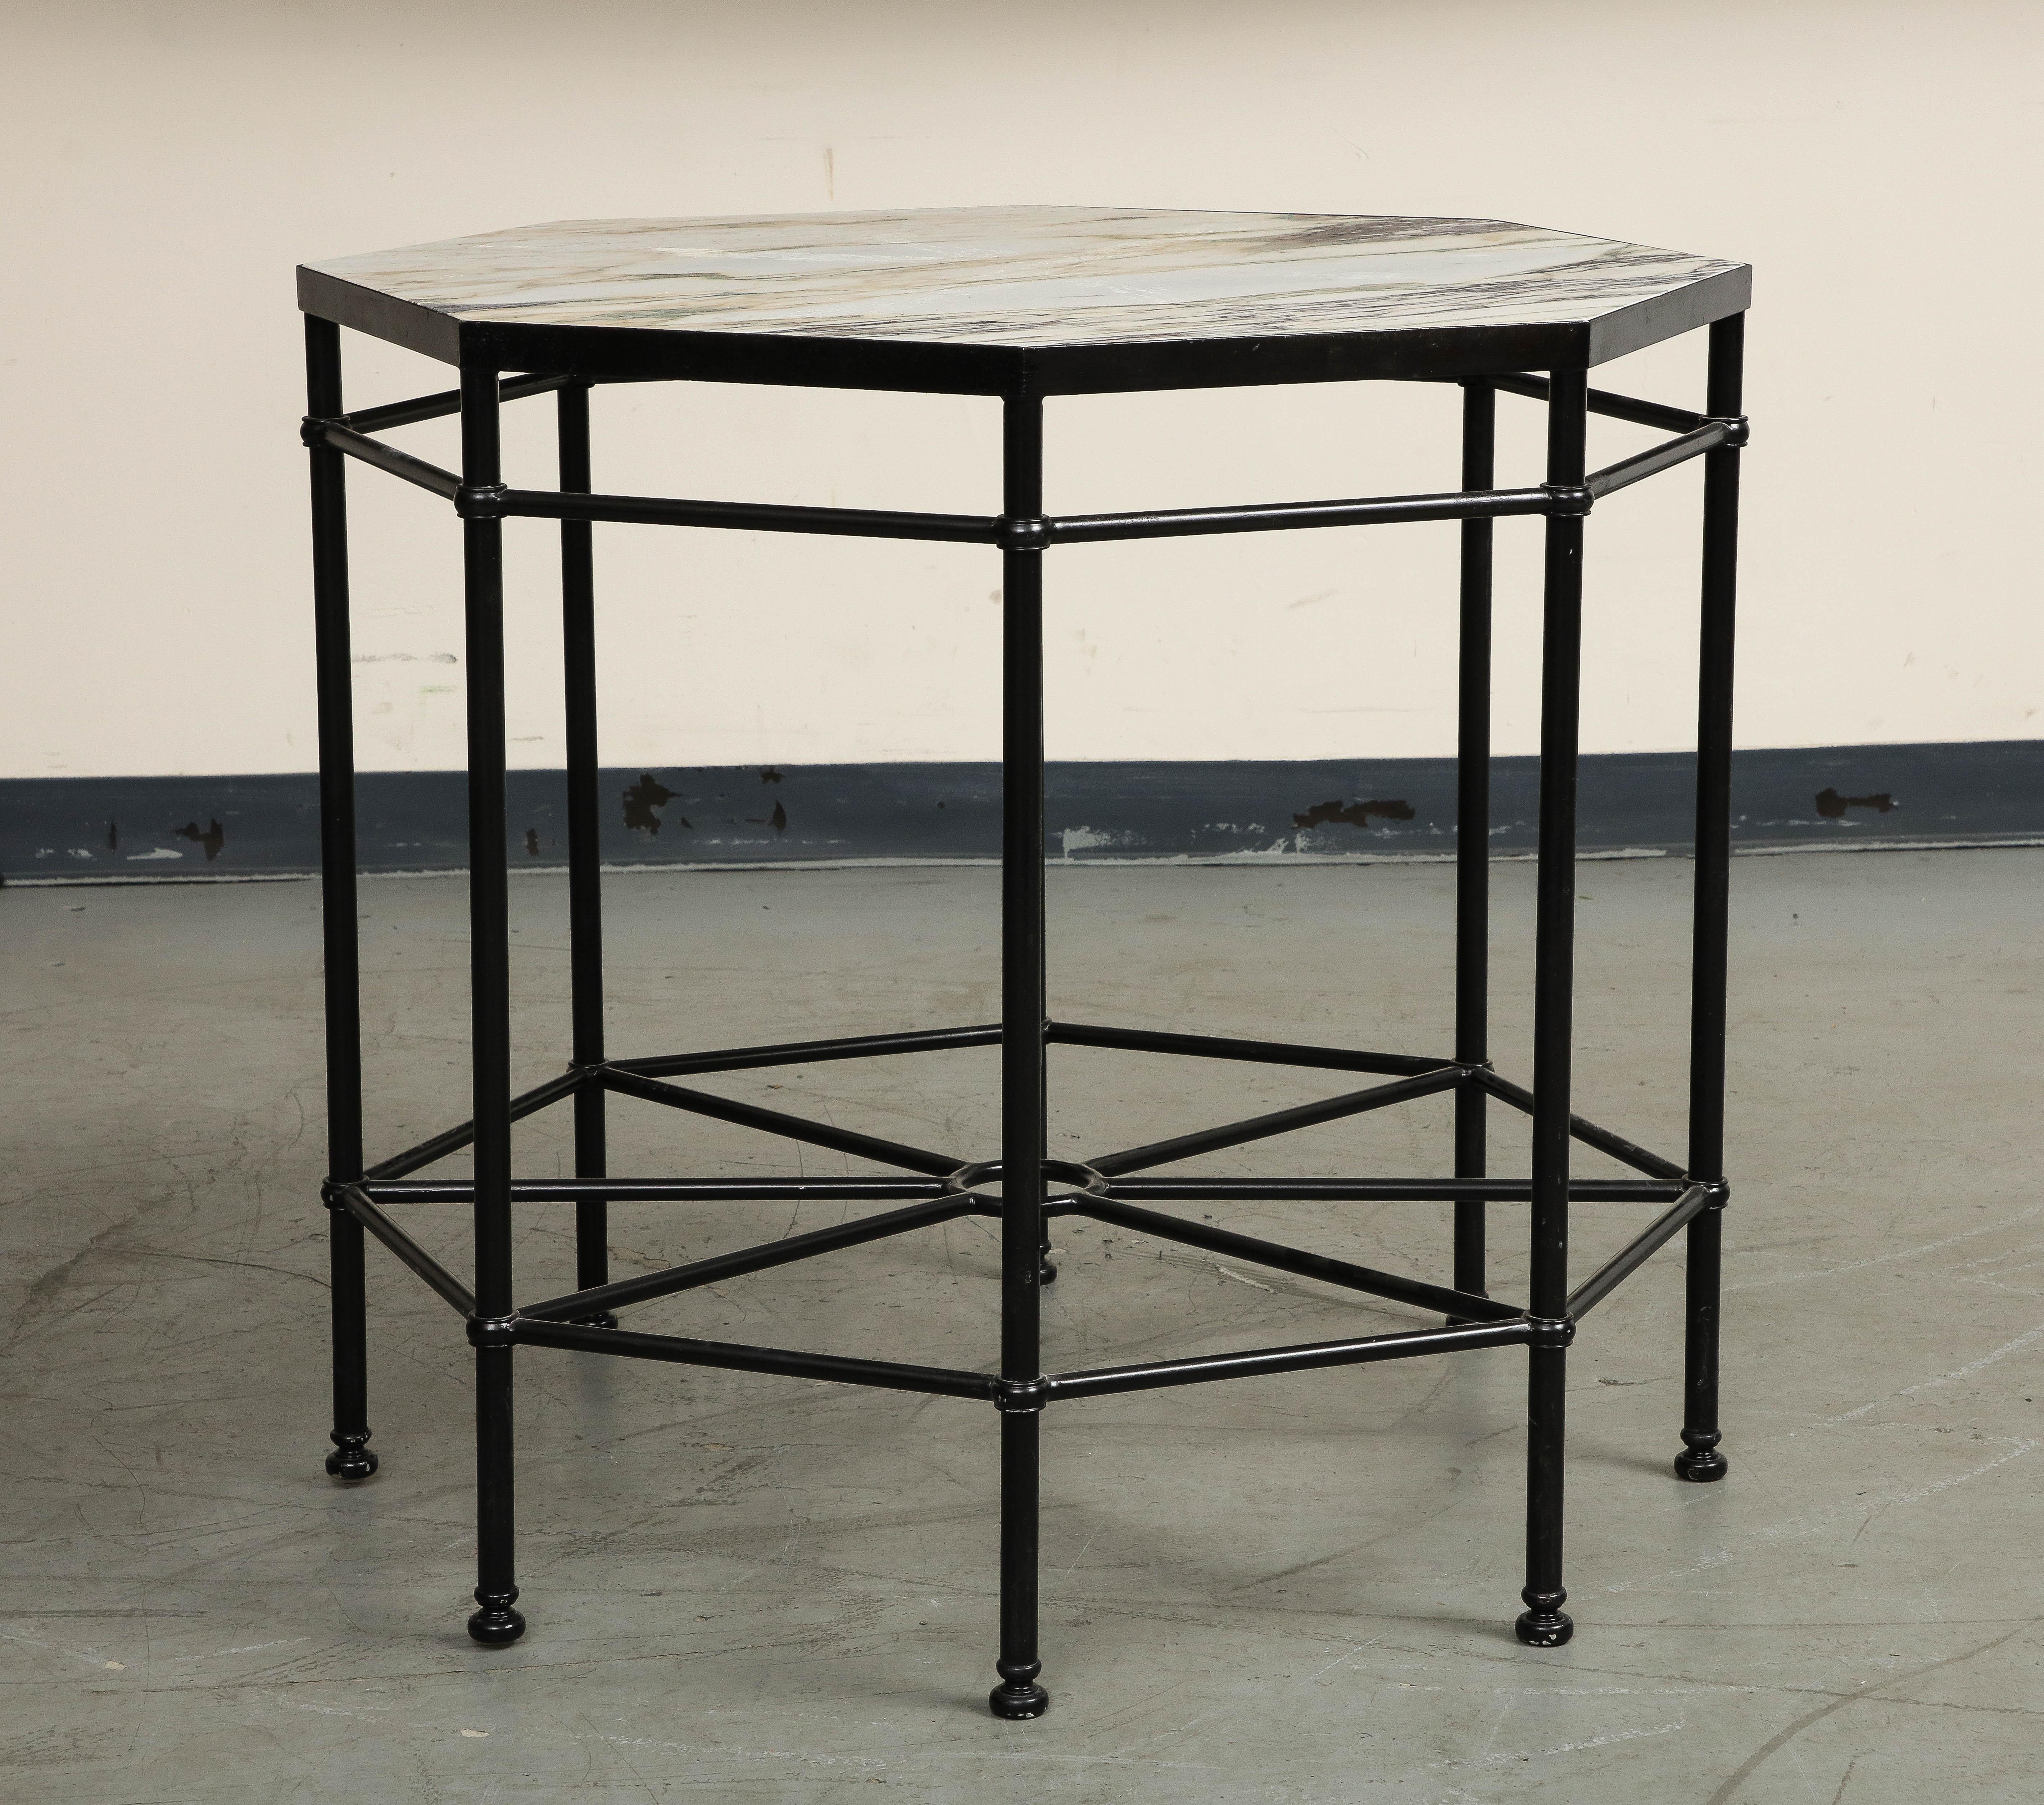 American 20th Century Octagonal Black Painted Steel Table with New Violetta Marble Top